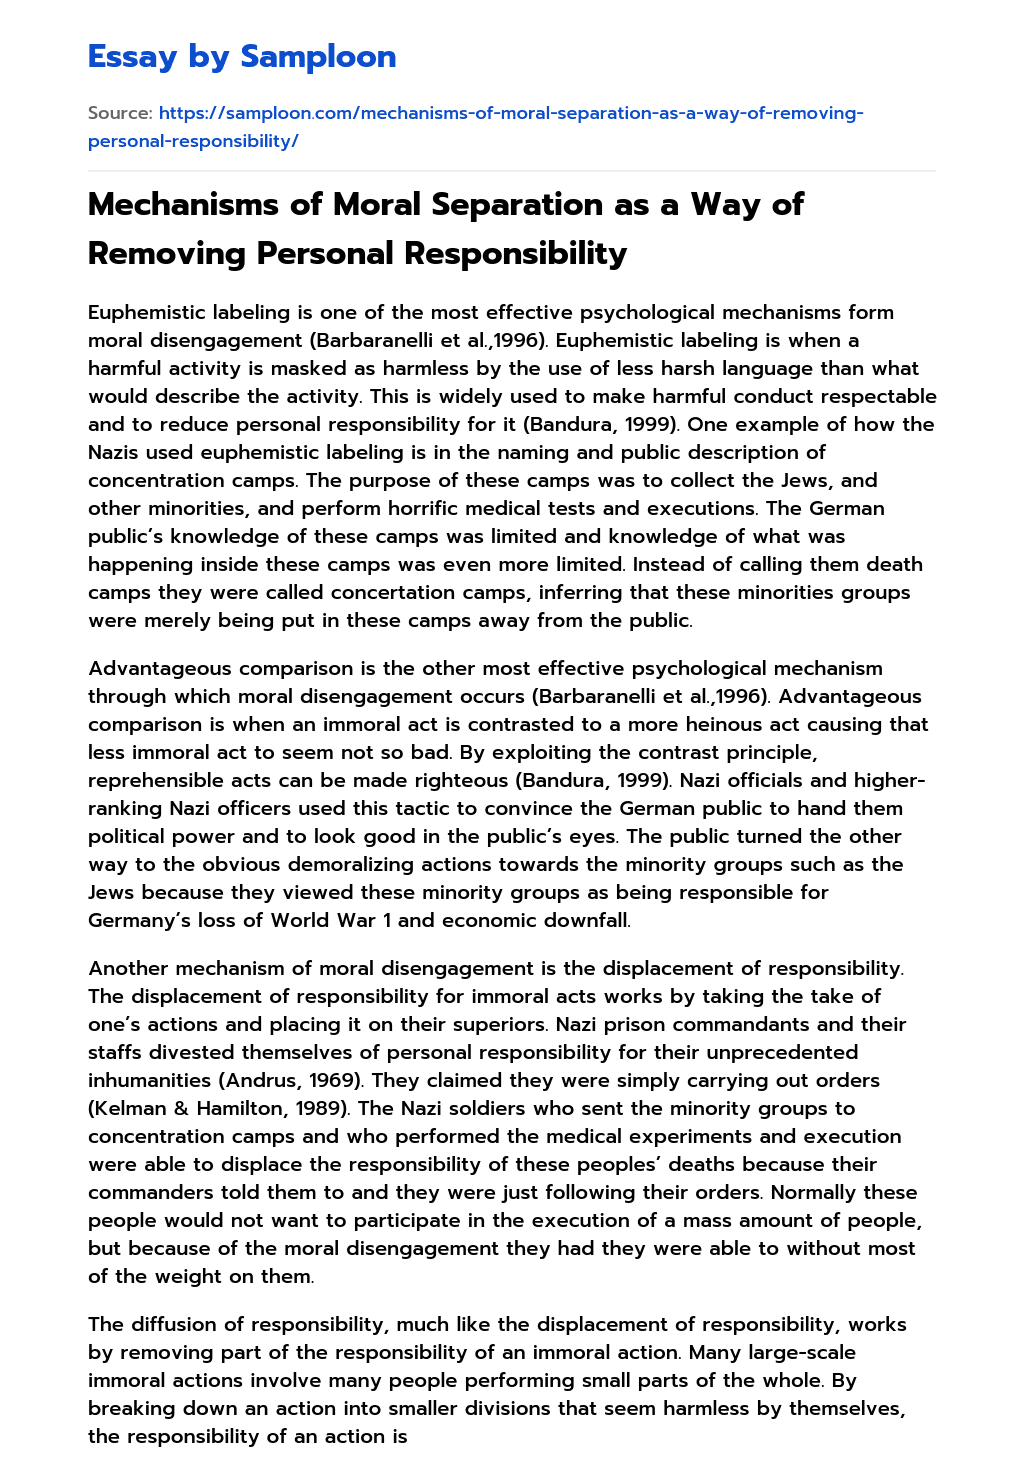 Mechanisms of Moral Separation as a Way of Removing Personal Responsibility essay